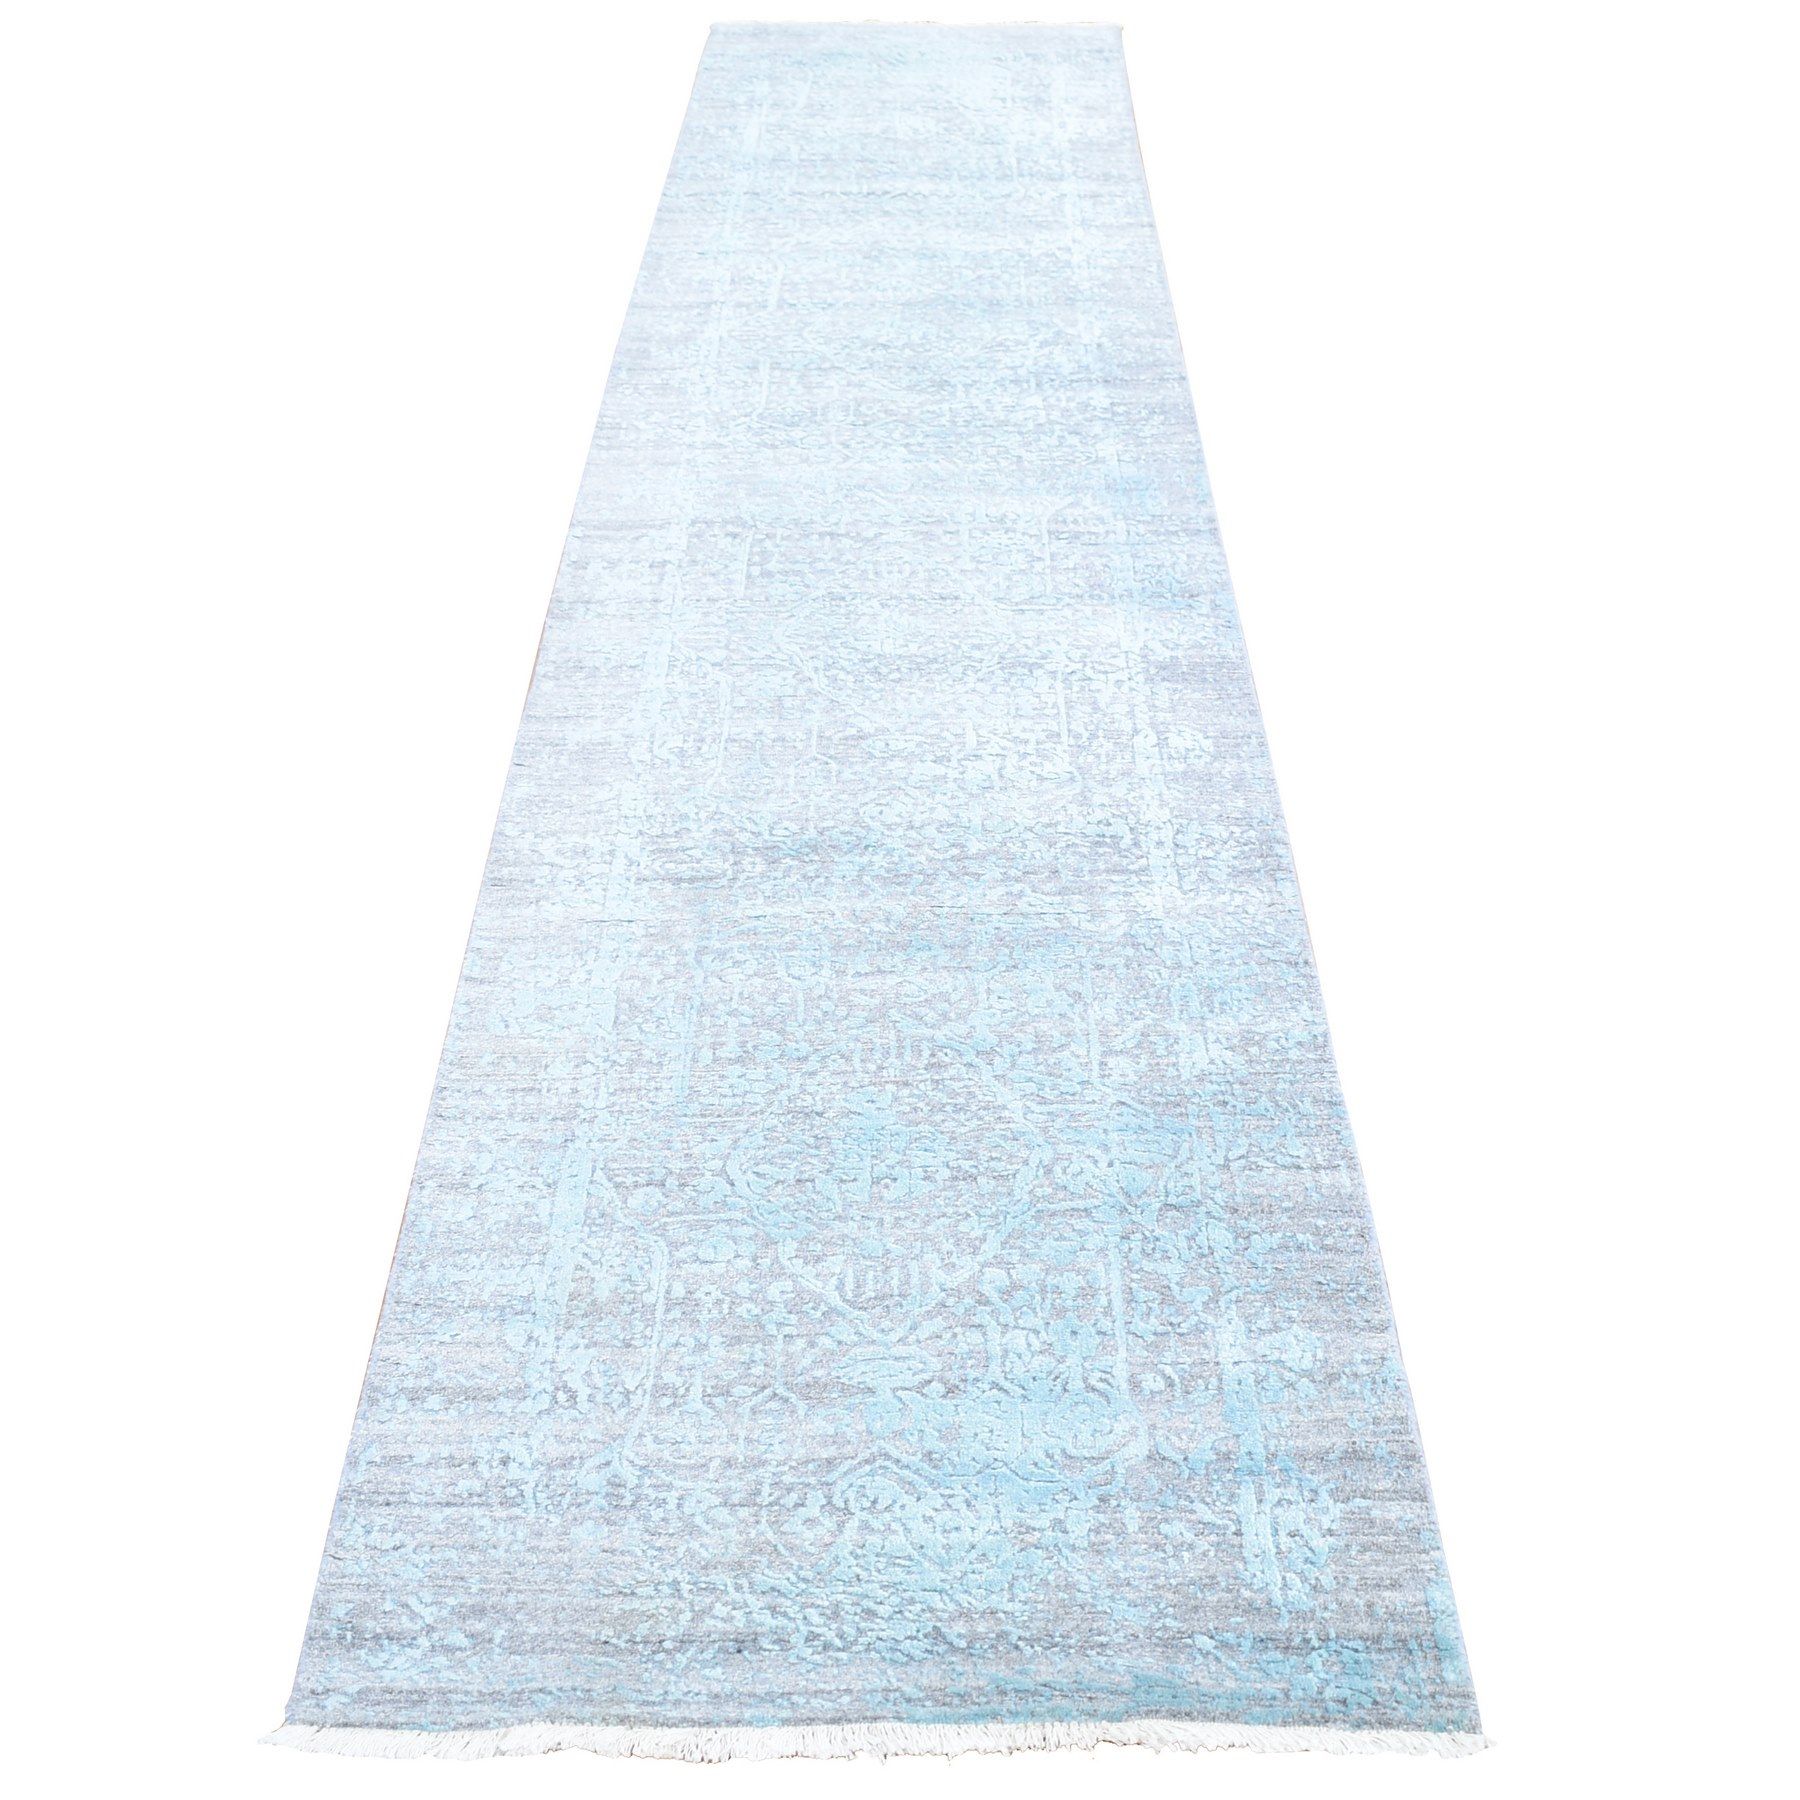 2'7"x14' Light Blue Wool And Pure Silk Hand Knotted Broken Persian Design  Oriental Xl Runner Rug – Carpets & Rugs Pertaining To Light Blue Runner Rugs (View 12 of 15)